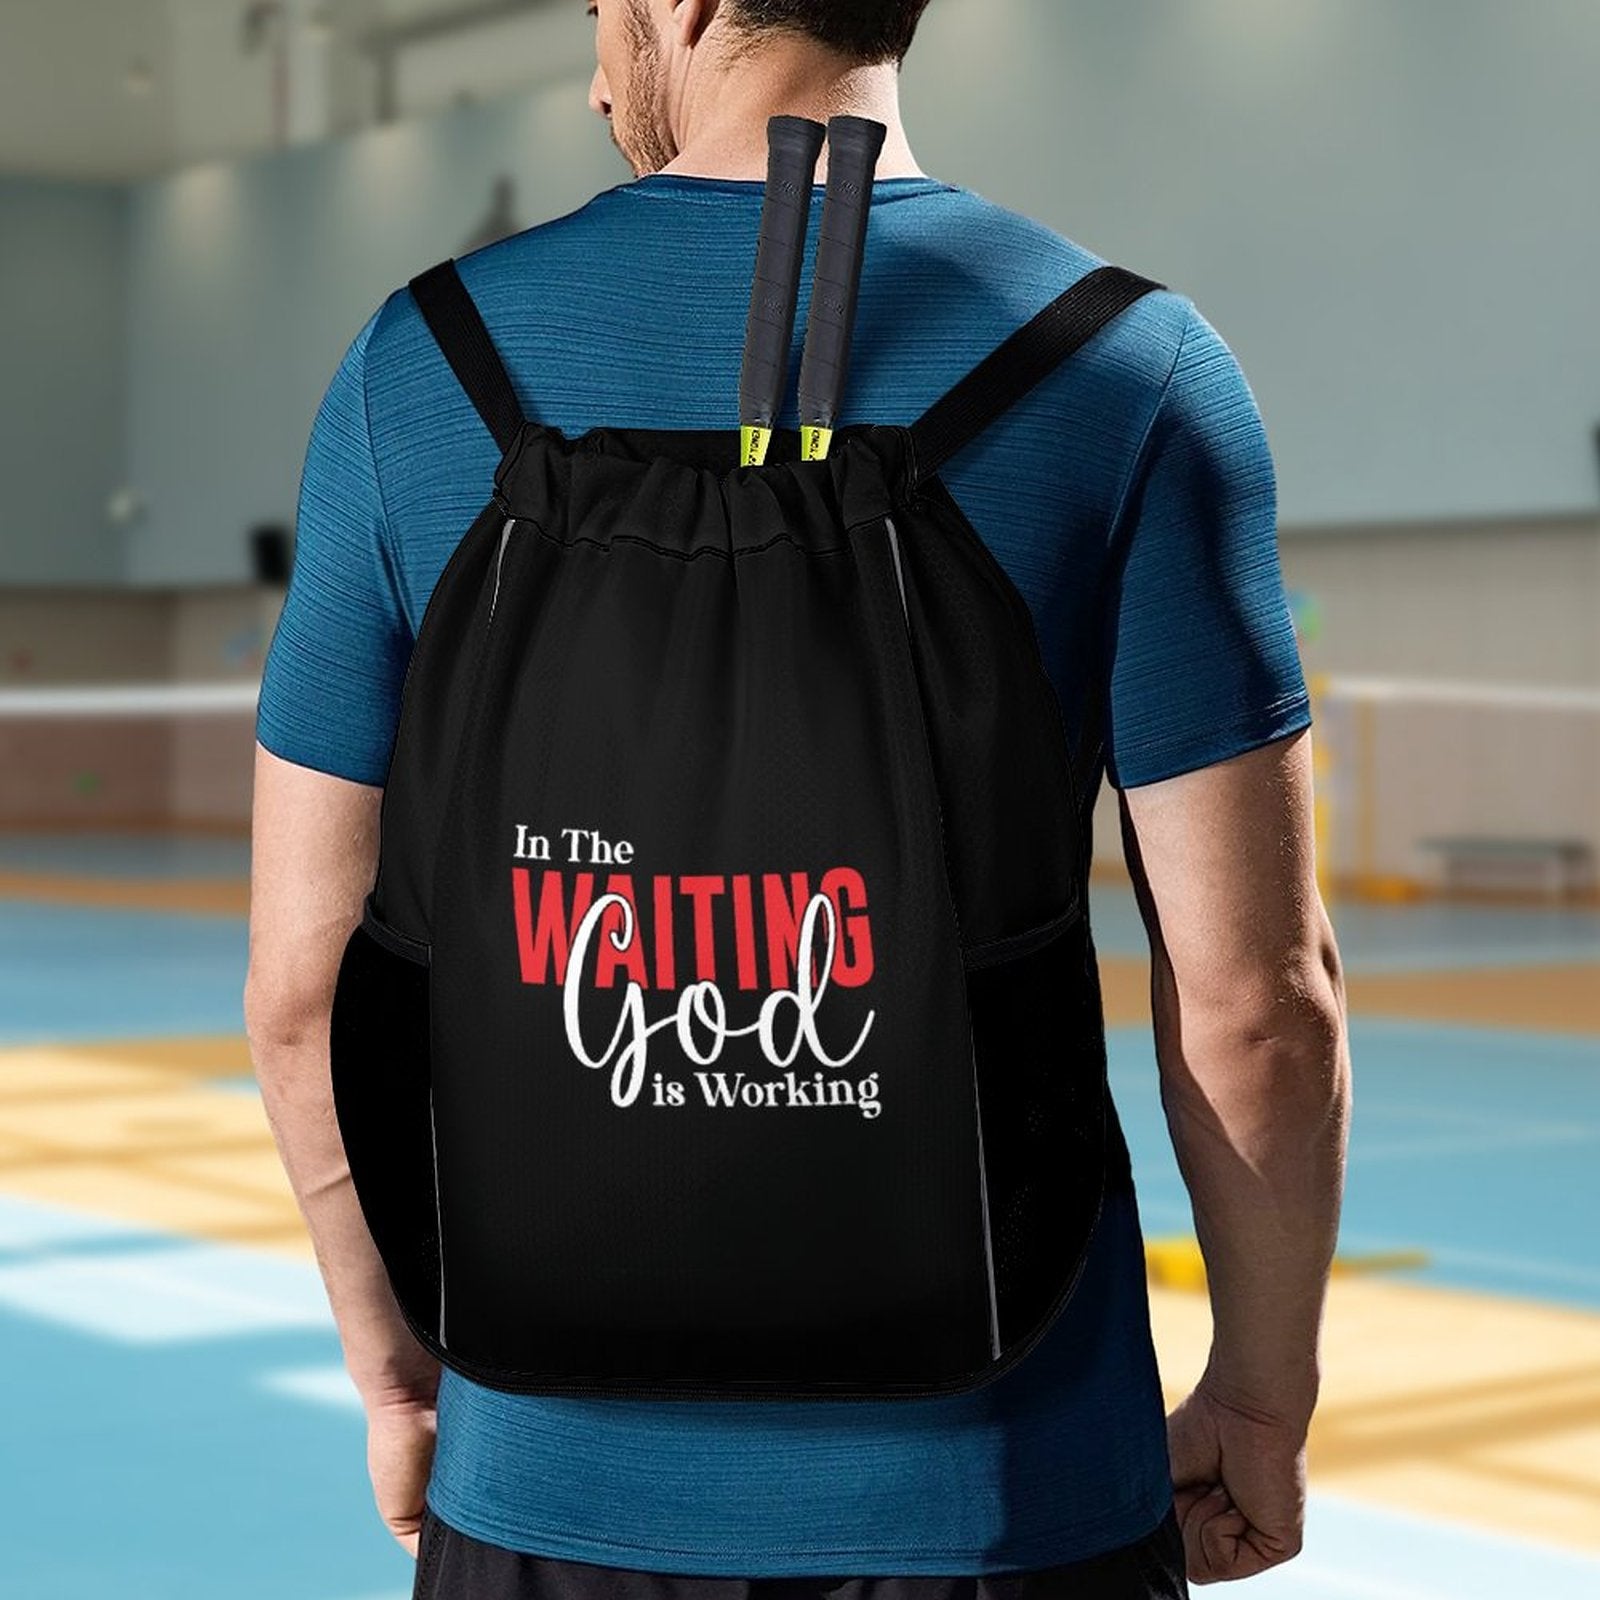 In The Waiting God Is Working Christian Waffle Cloth Drawstring Bag SALE-Personal Design